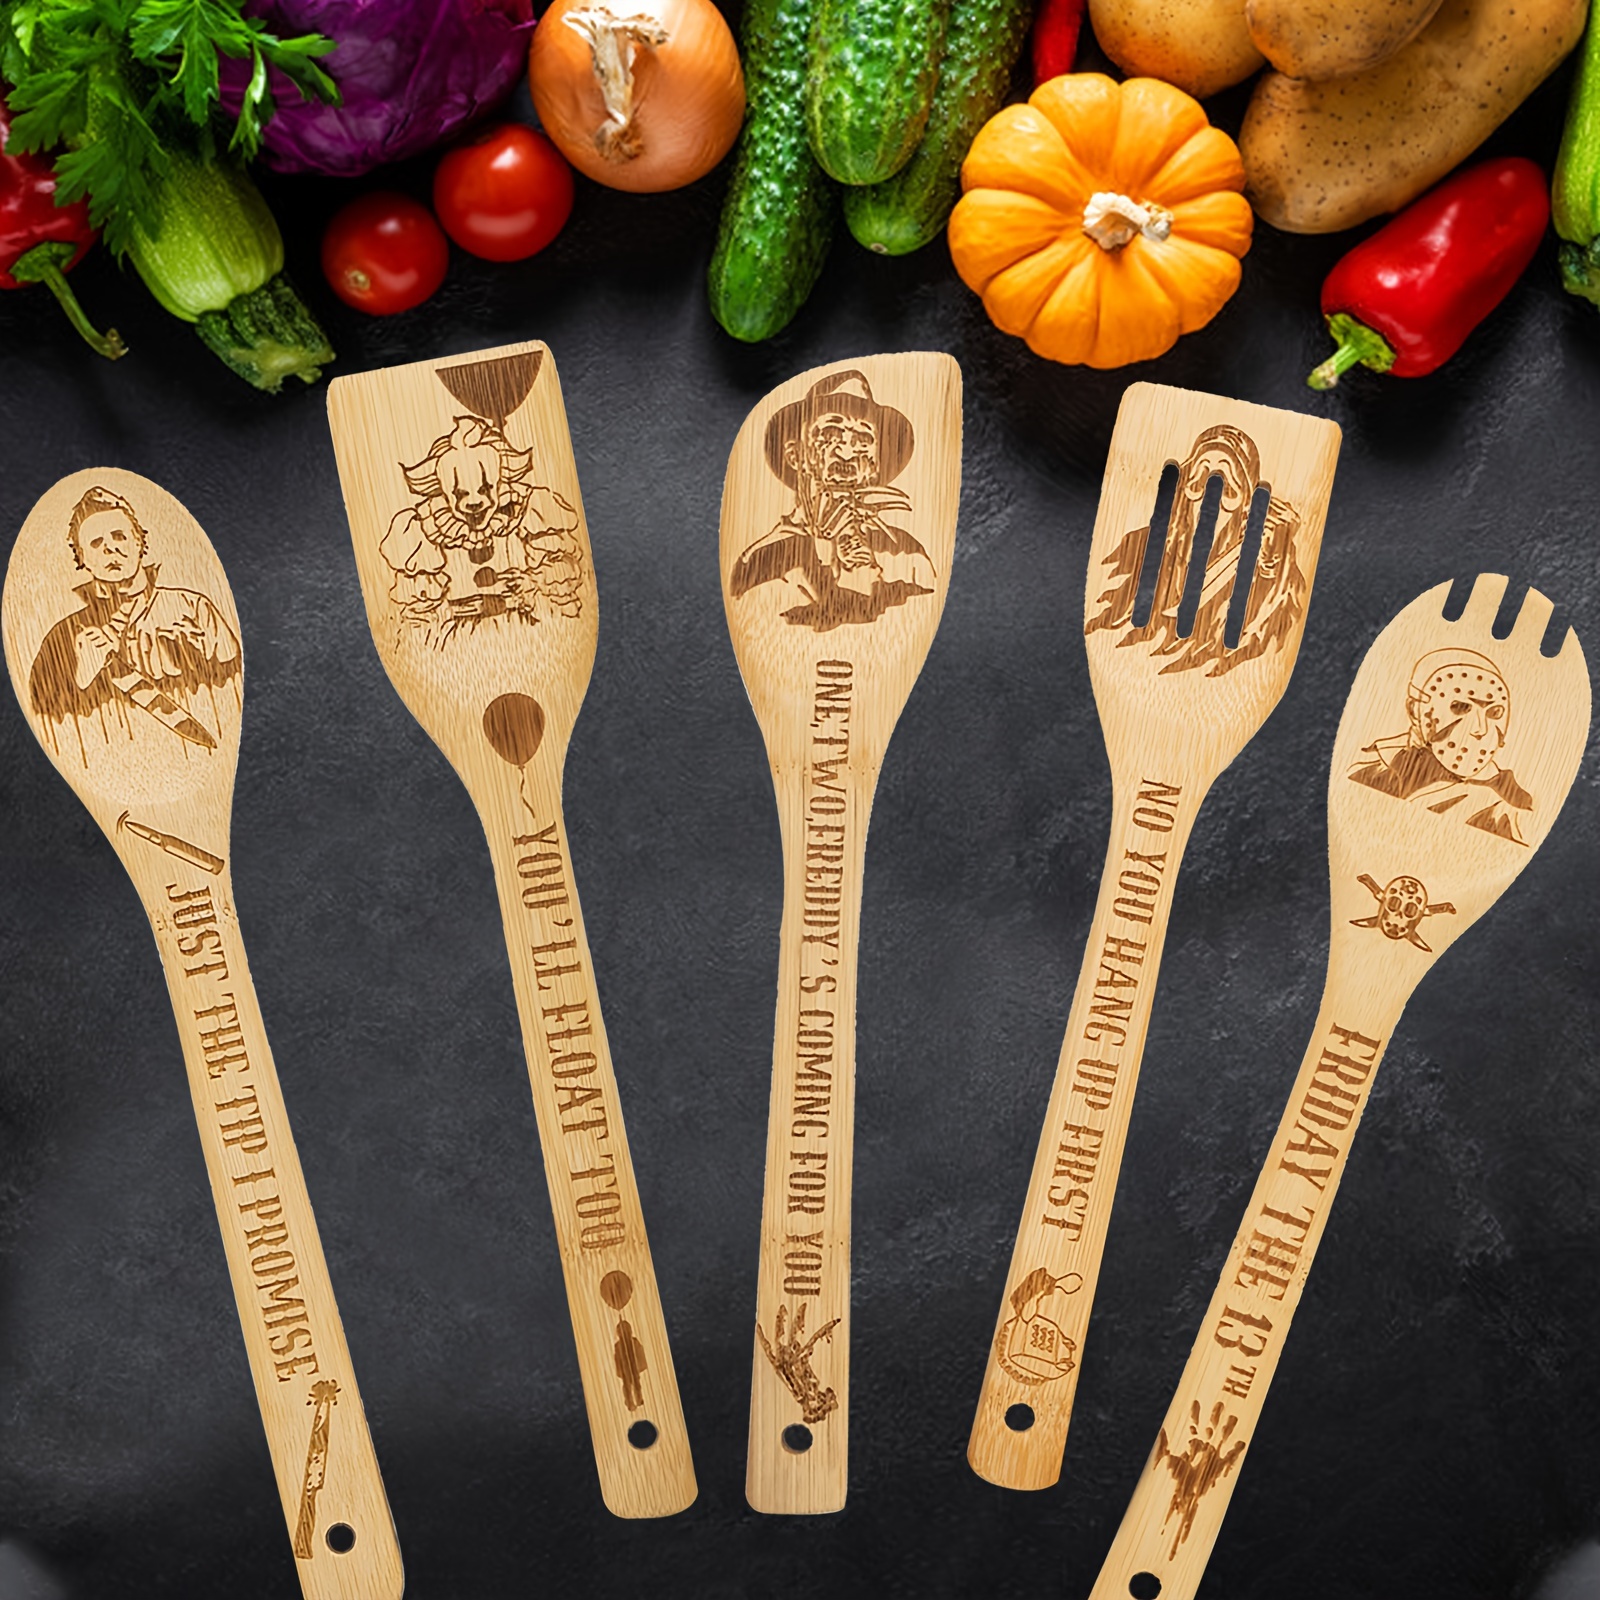 5pcs cooking spoons funny engraved wooden cooking spoons horror character bamboo wood utensils cookware kit horror movie theme kitchen decor gift for movie lover christmas party housewarming birthday gift details 0